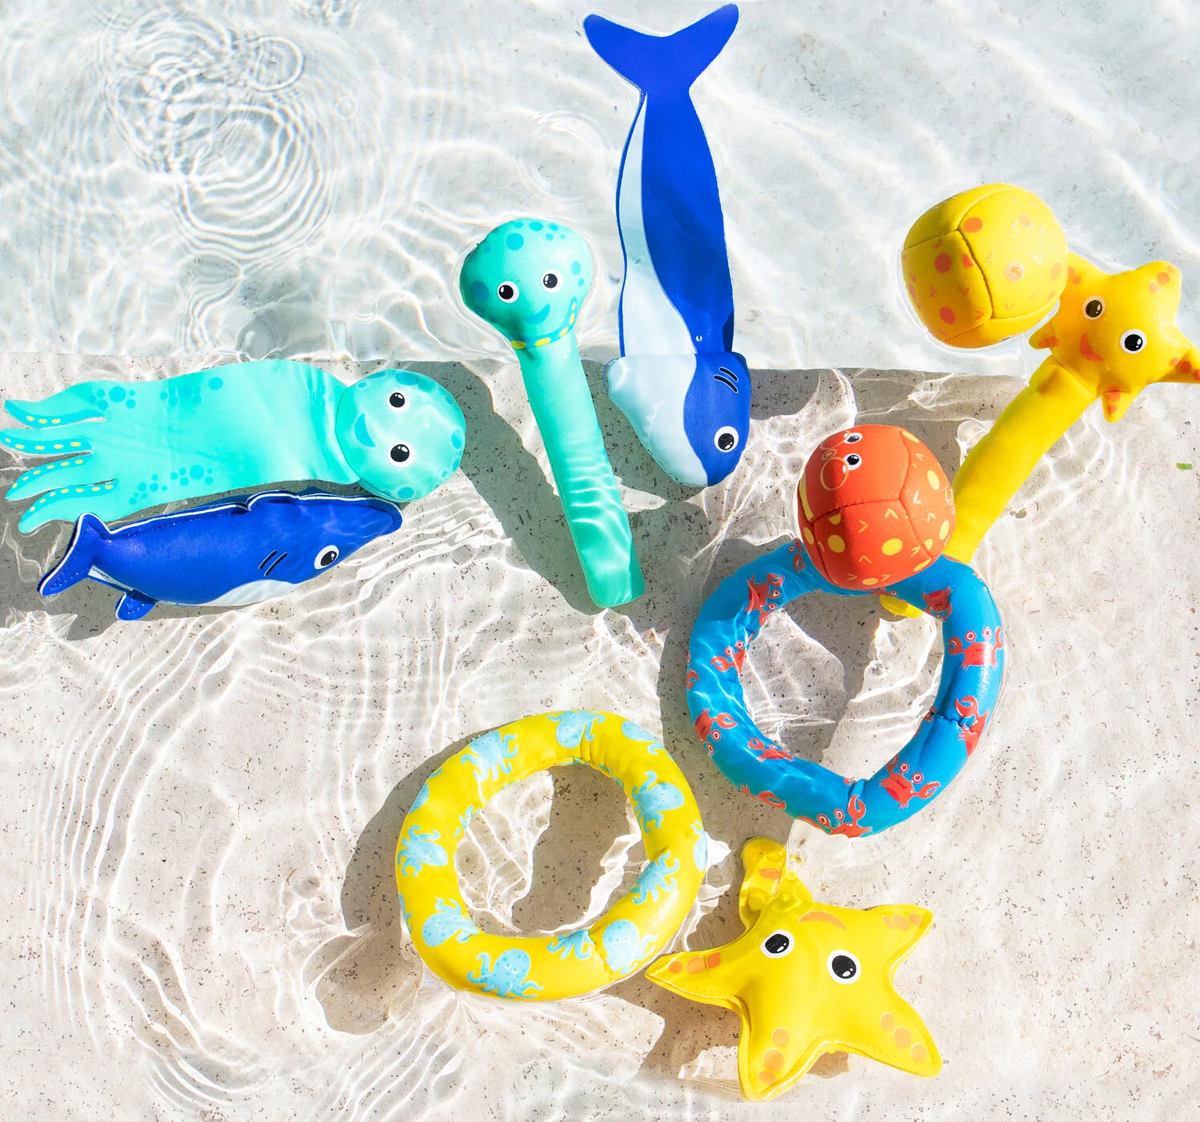 various water toys in water at beach